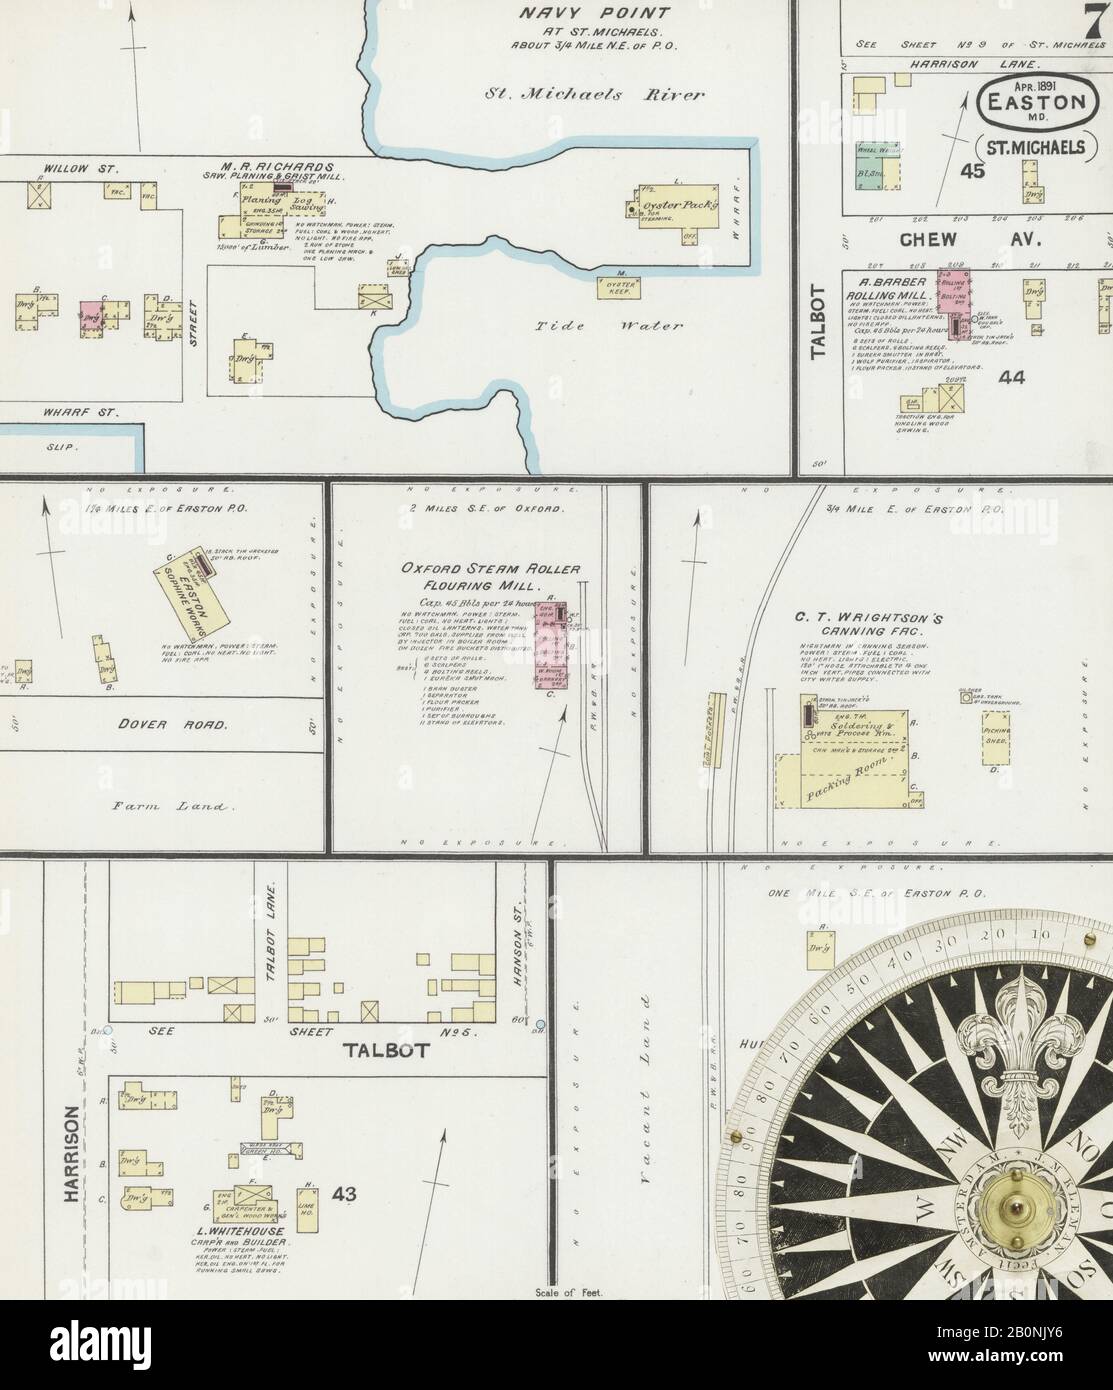 Image 7 of Sanborn Fire Insurance Map from Easton, Talbot County, Maryland. Apr 1891. 12 Sheet(s). Includes Saint Michaels, Oxford, Trappe, America, street map with a Nineteenth Century compass Stock Photo